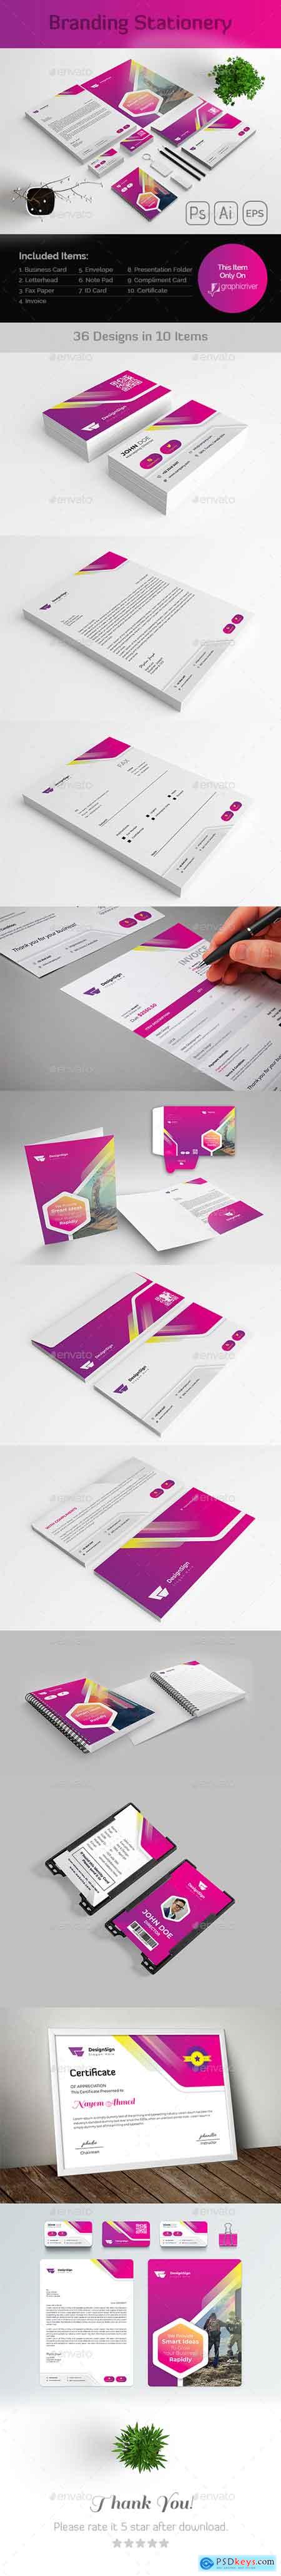 GraphicRiver Branding Stationery Template